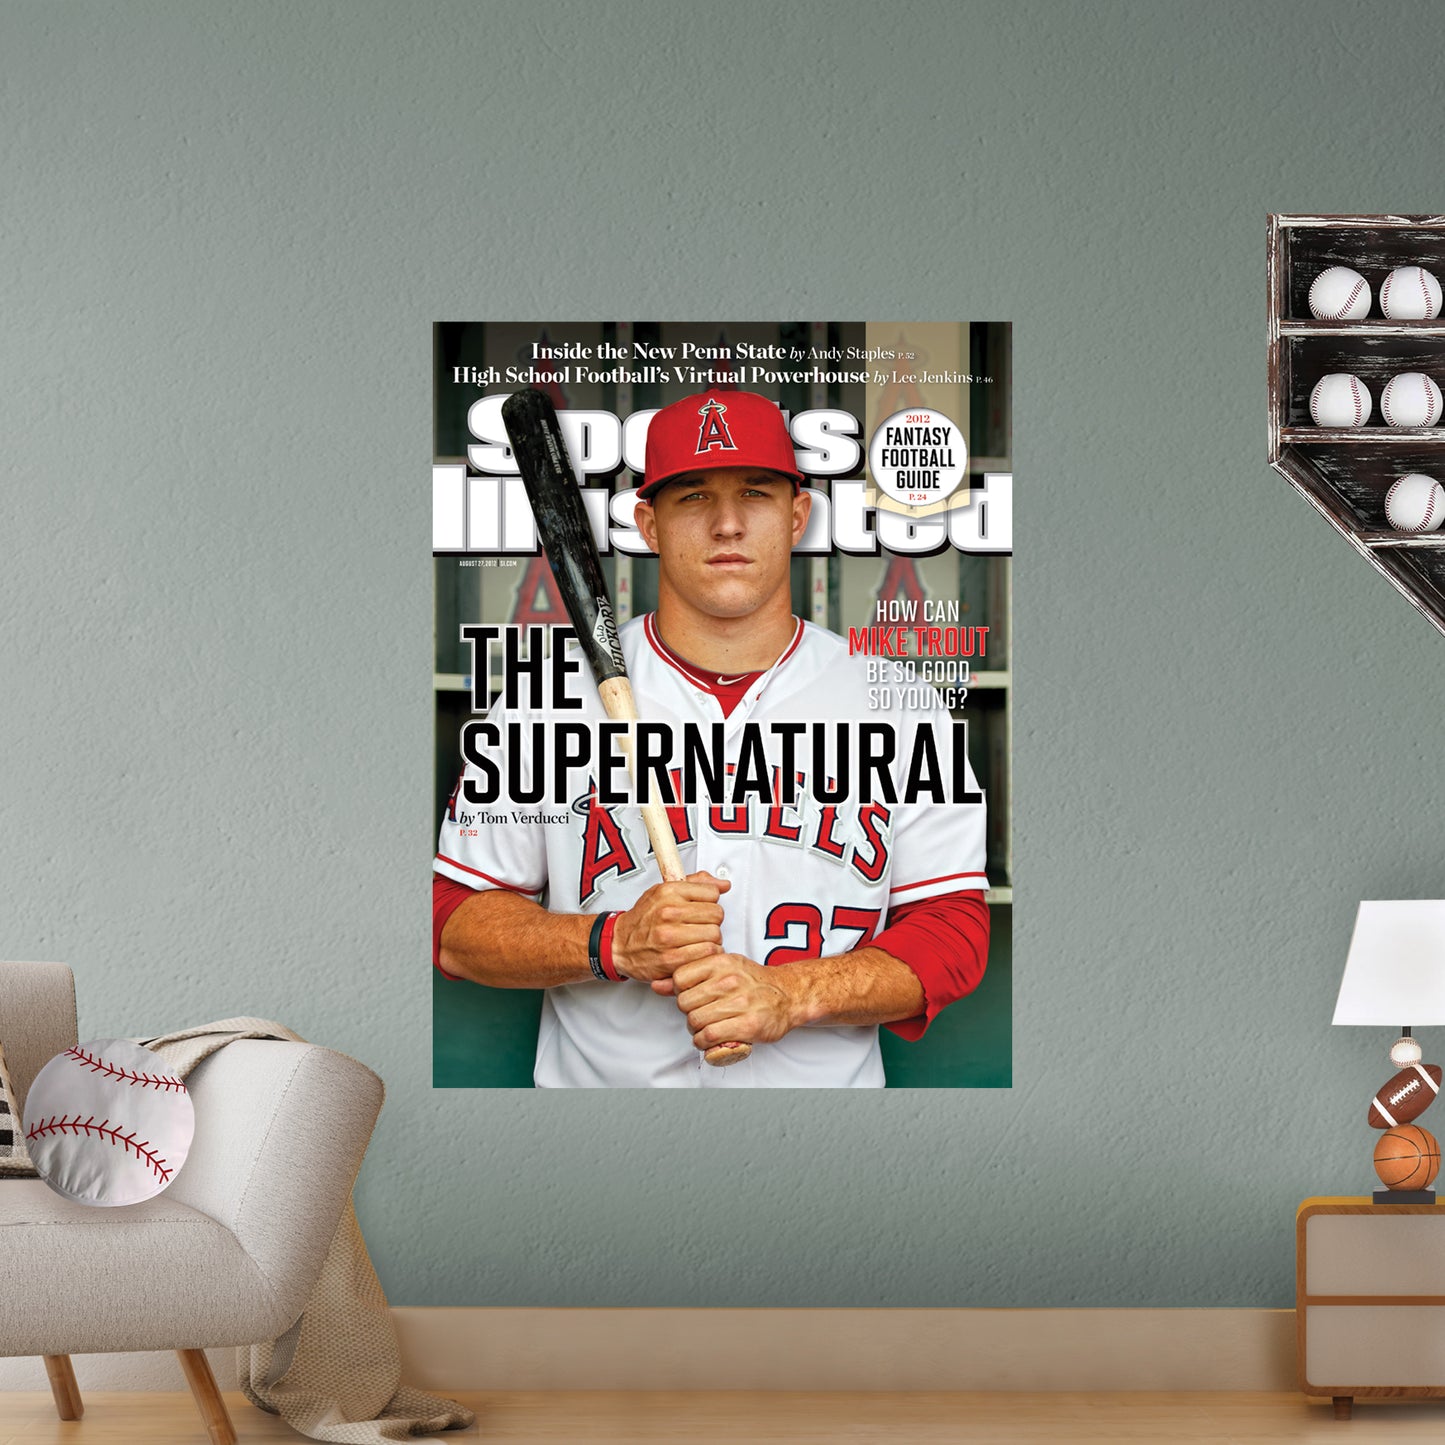 Los Angeles Angels: Mike Trout August 2012 Sports Illustrated Cover - Officially Licensed MLB Removable Adhesive Decal